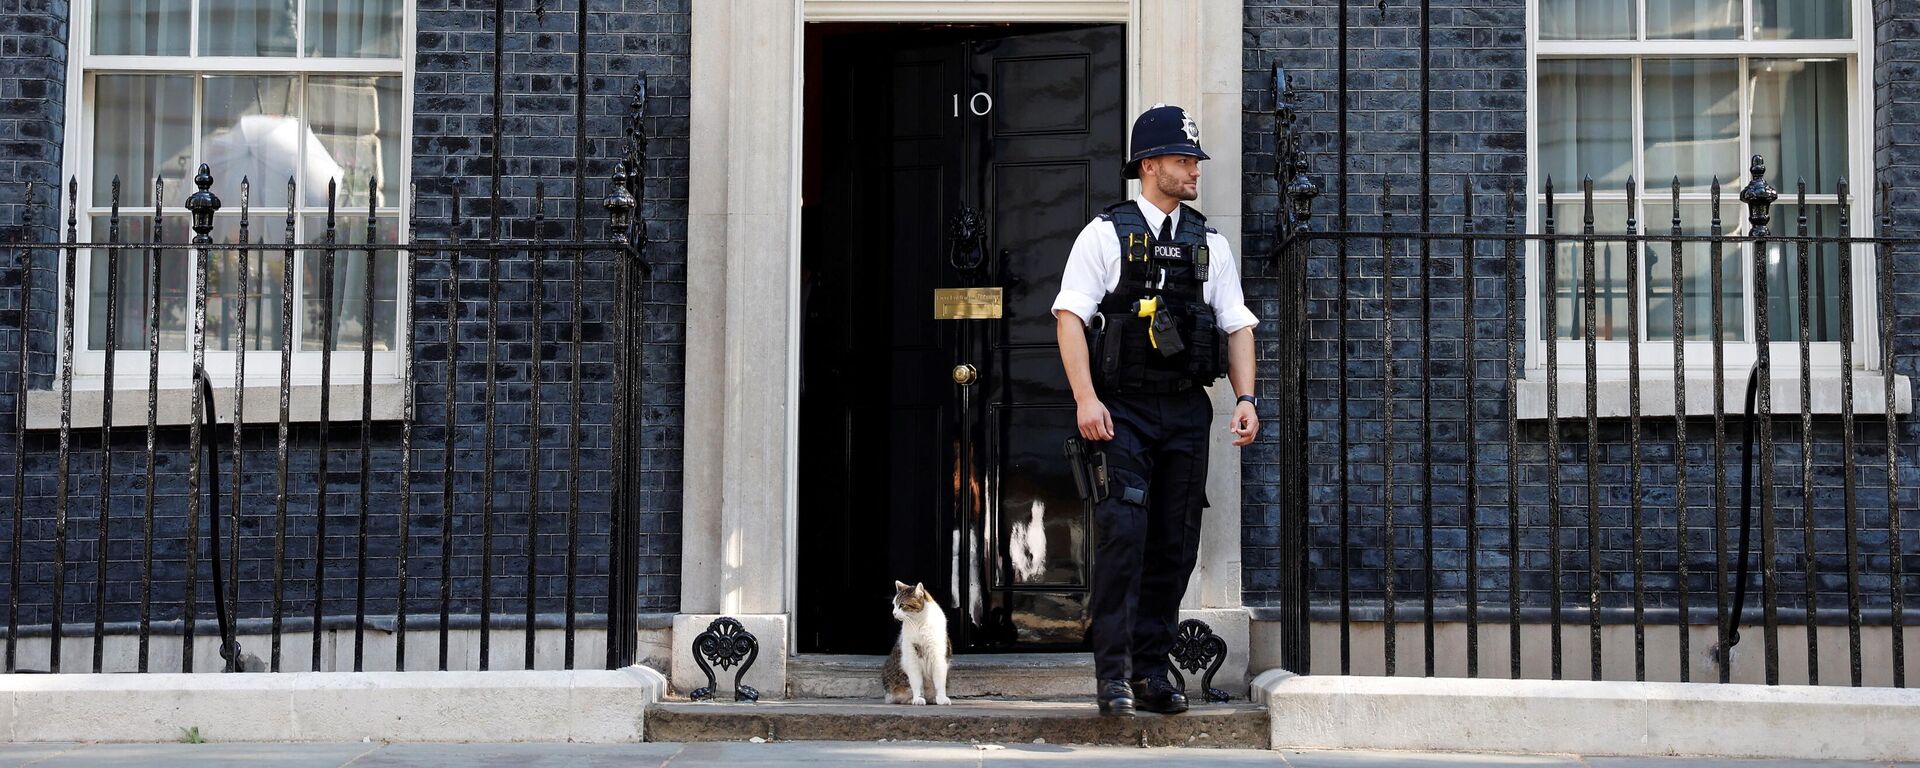 Larry the Downing Street cat sits on the step next to a police officer outside 10 Downing Street, the official residence of Britain's Prime Minister, in central London on July 8, 2022 - Sputnik International, 1920, 14.07.2022